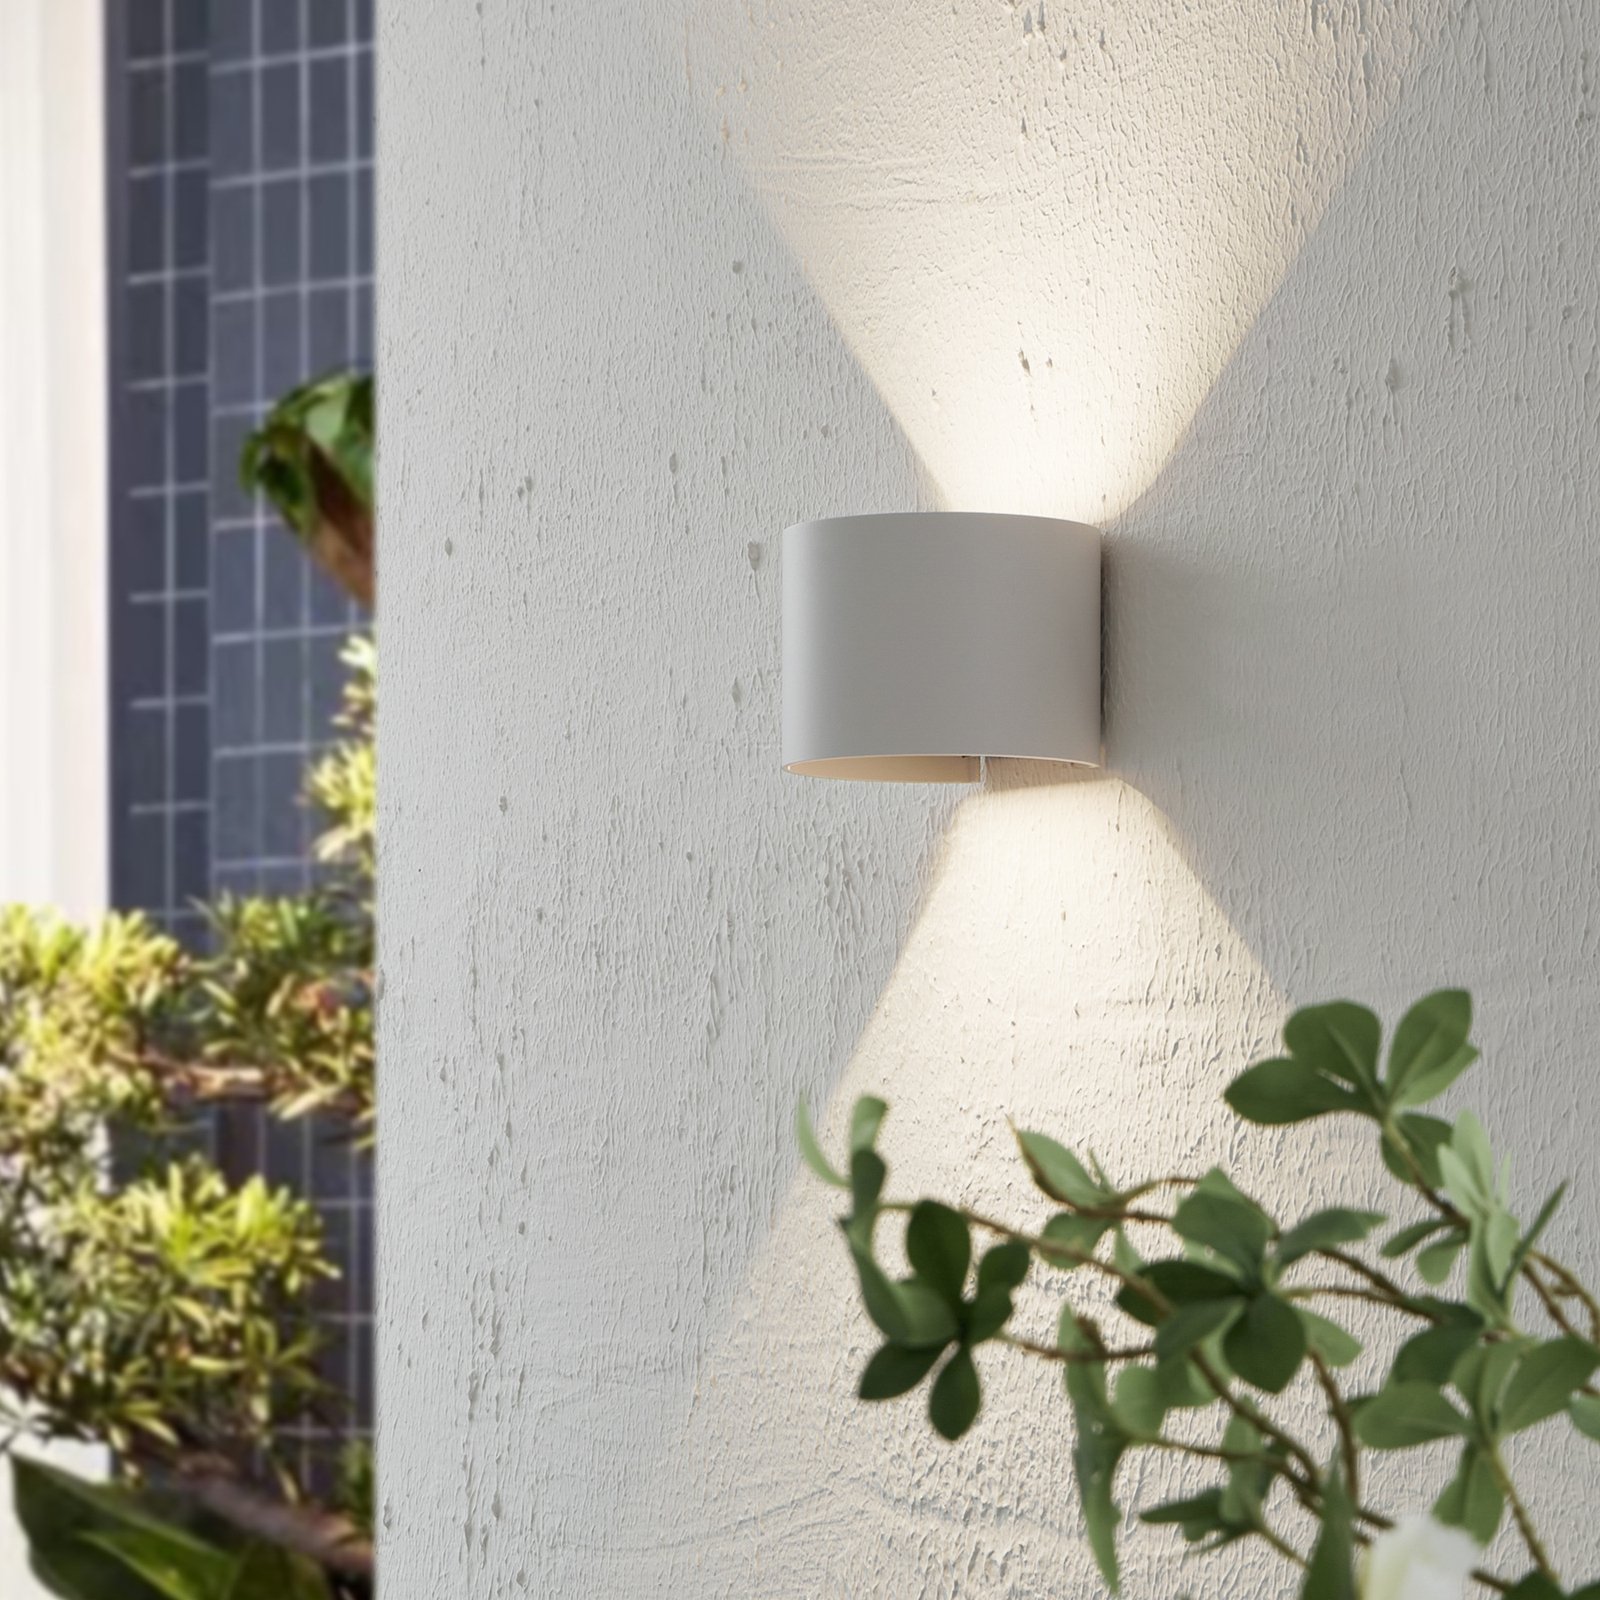 Lindby Nivar LED outdoor wall lamp round white